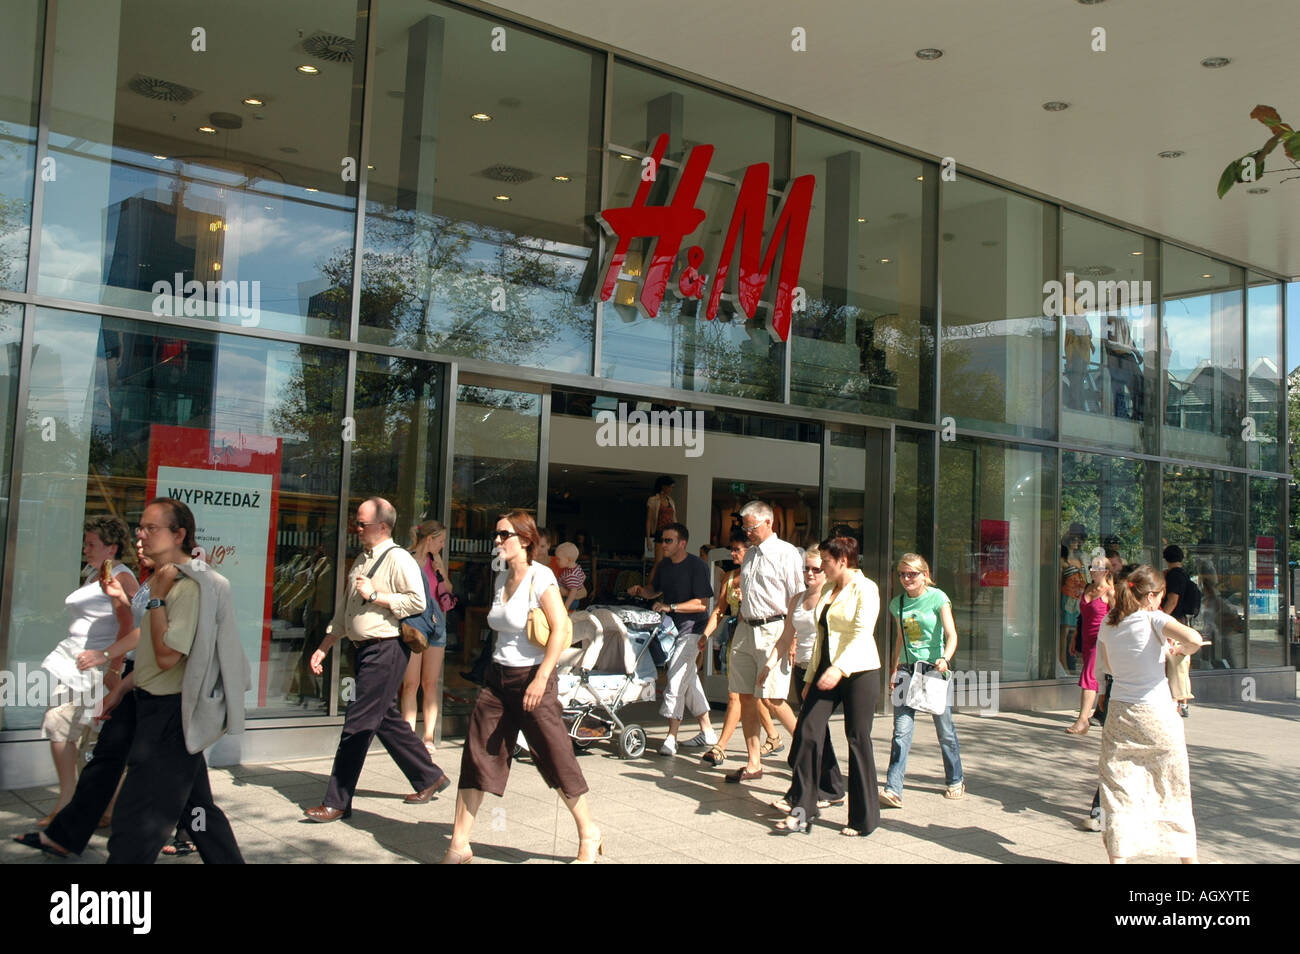 H&M clothes shop in Warsaw Stock Photo - Alamy